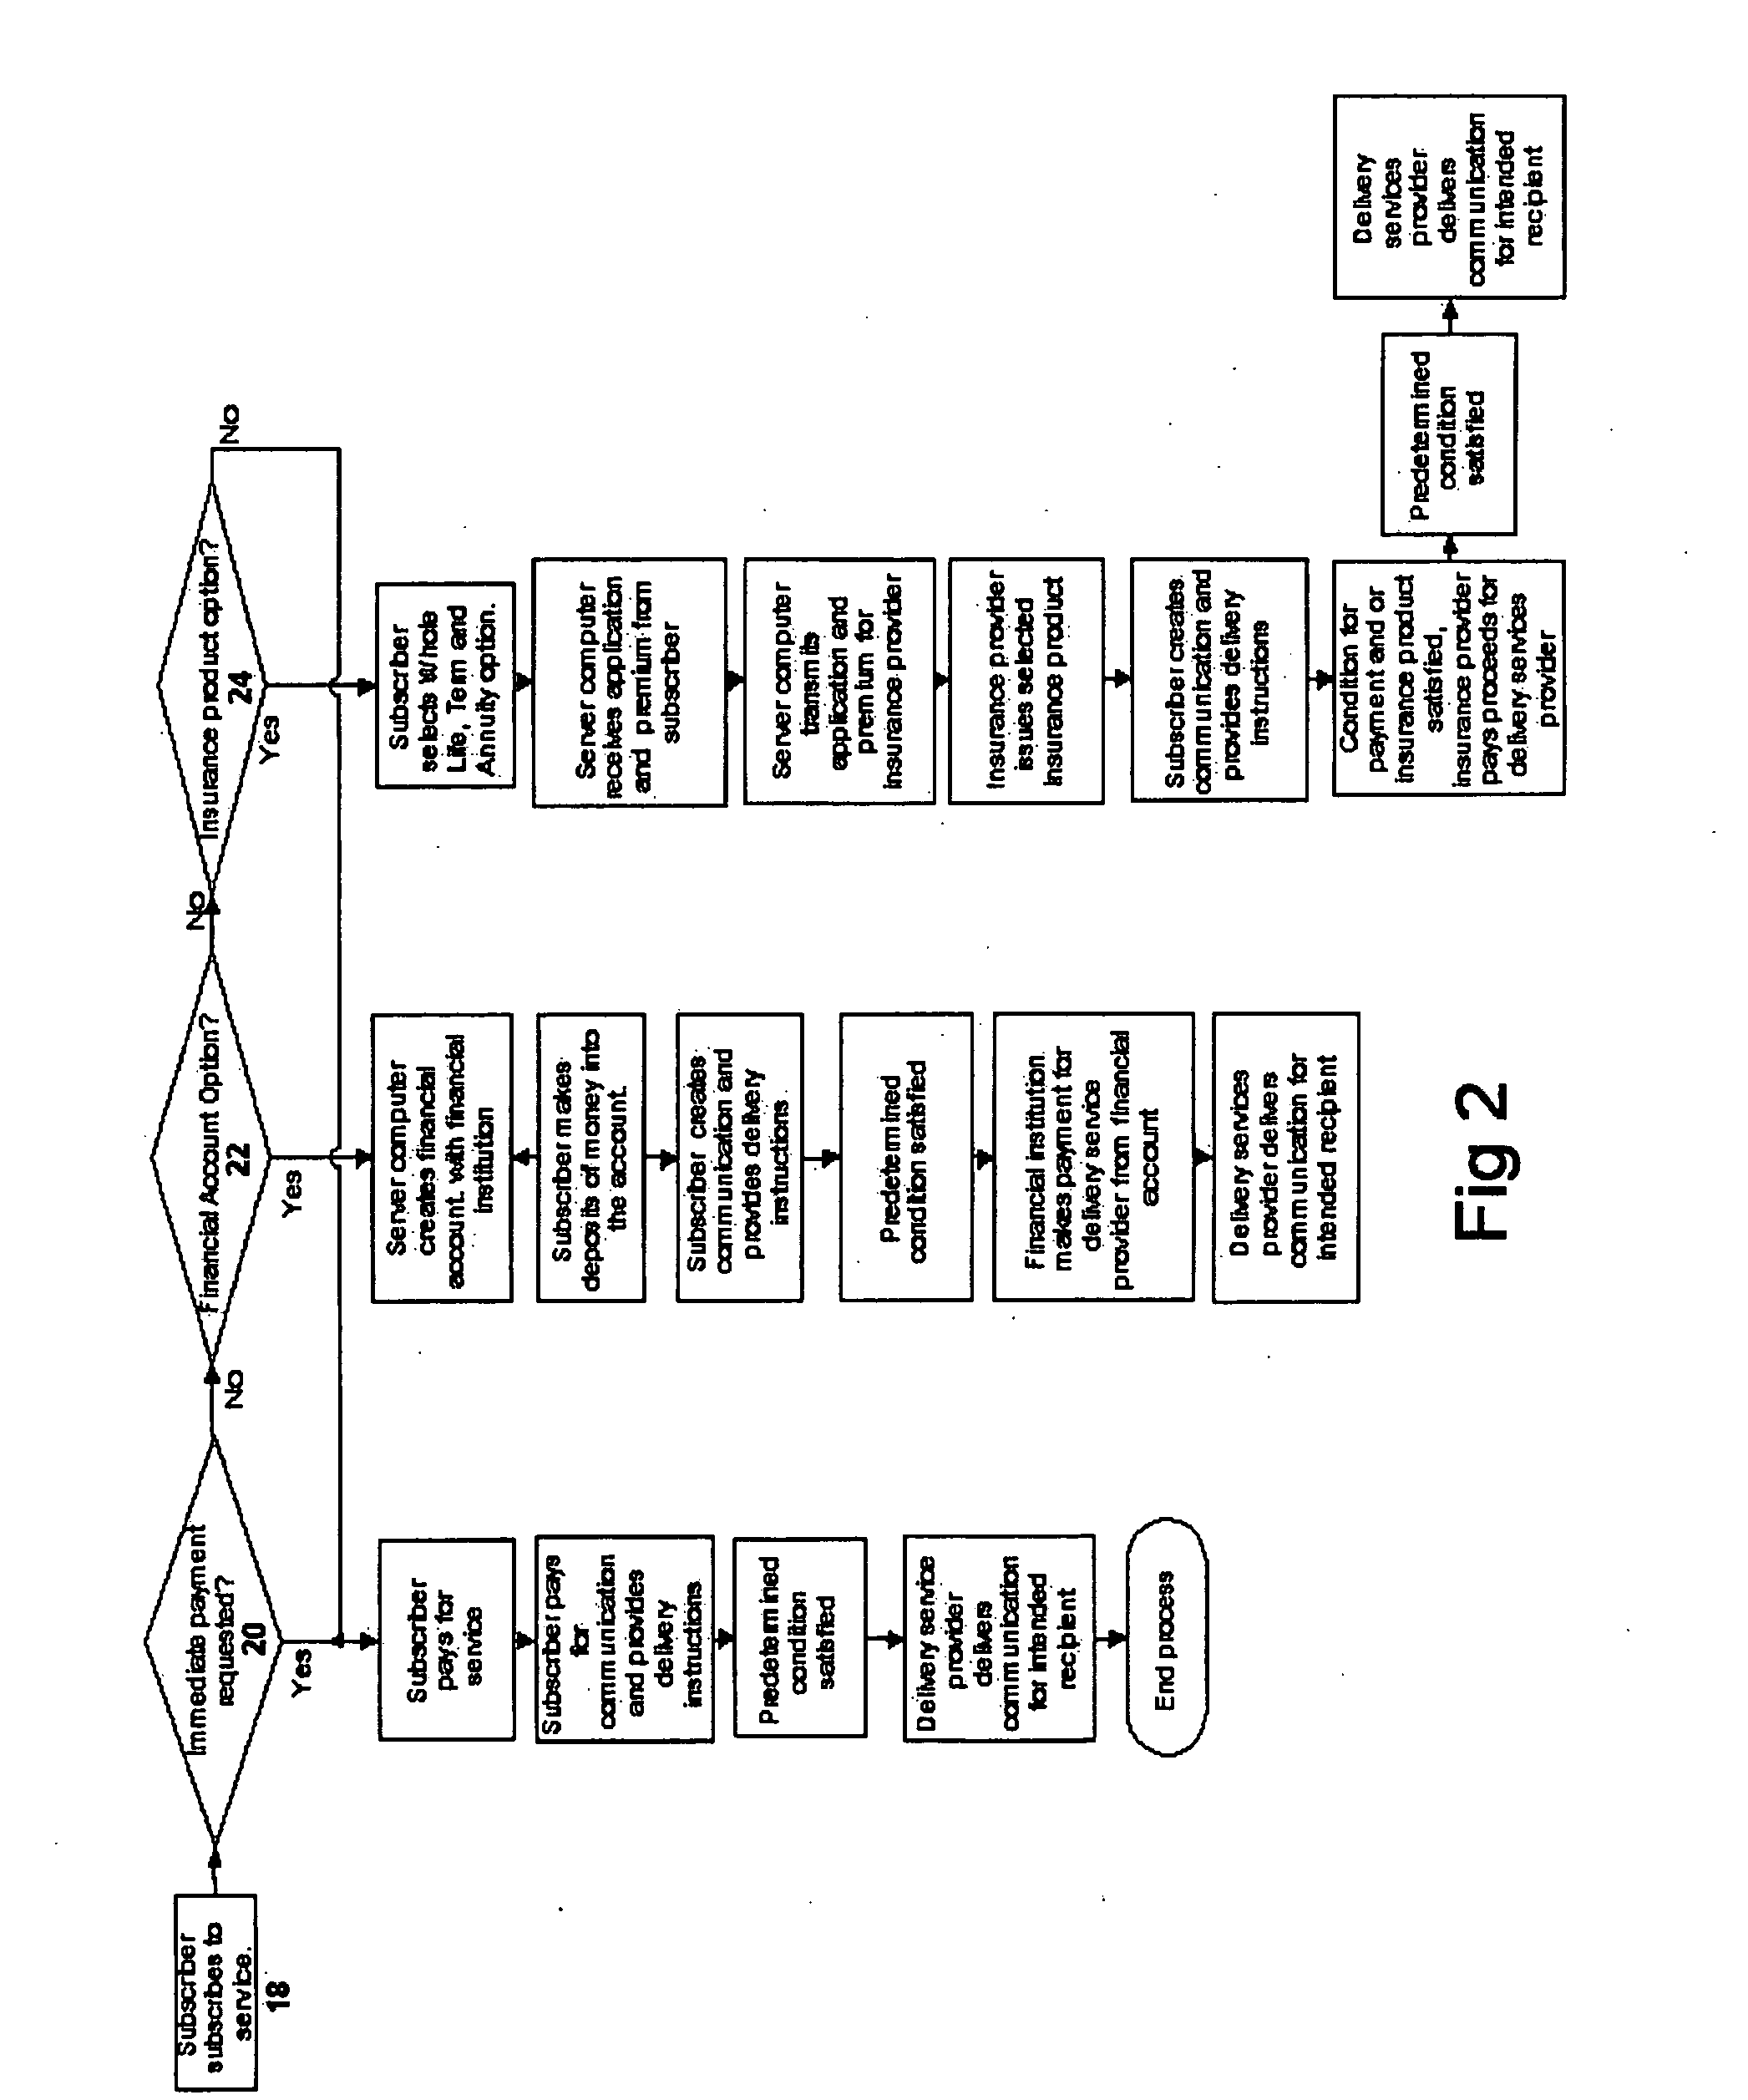 Future delivery apparatus and method